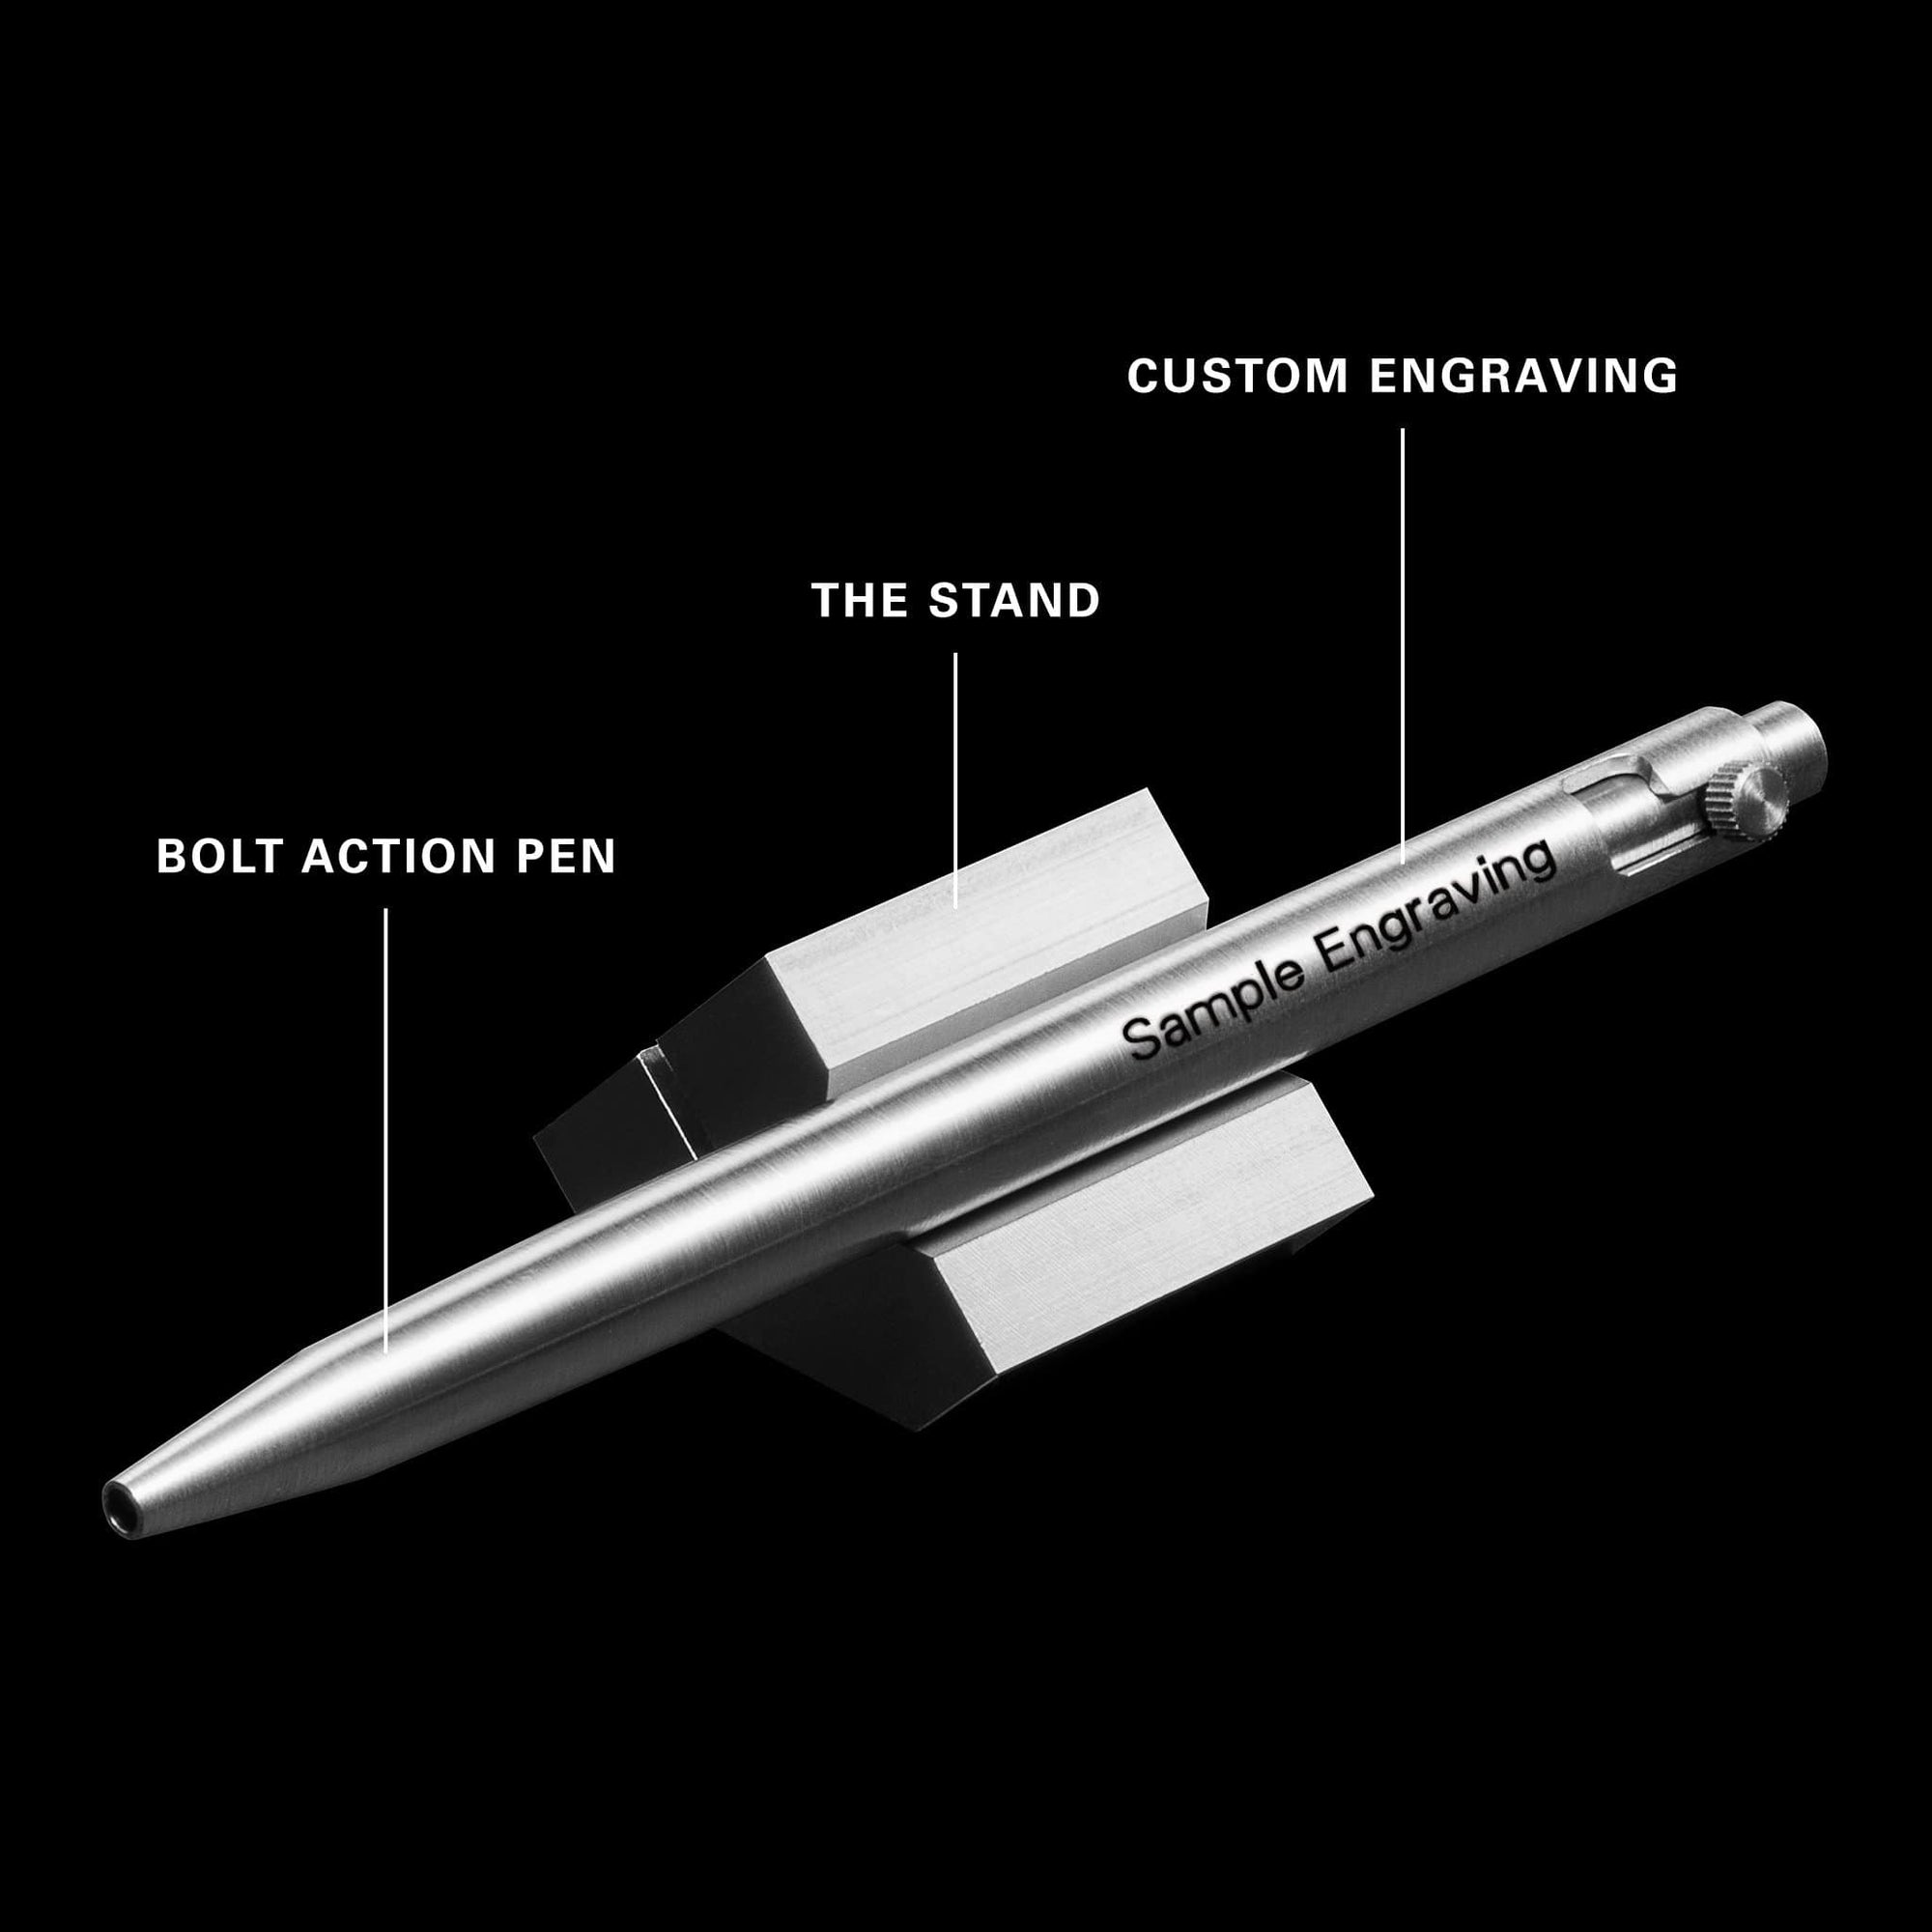 BOLT ACTION PEN + STAND + ENGRAVING